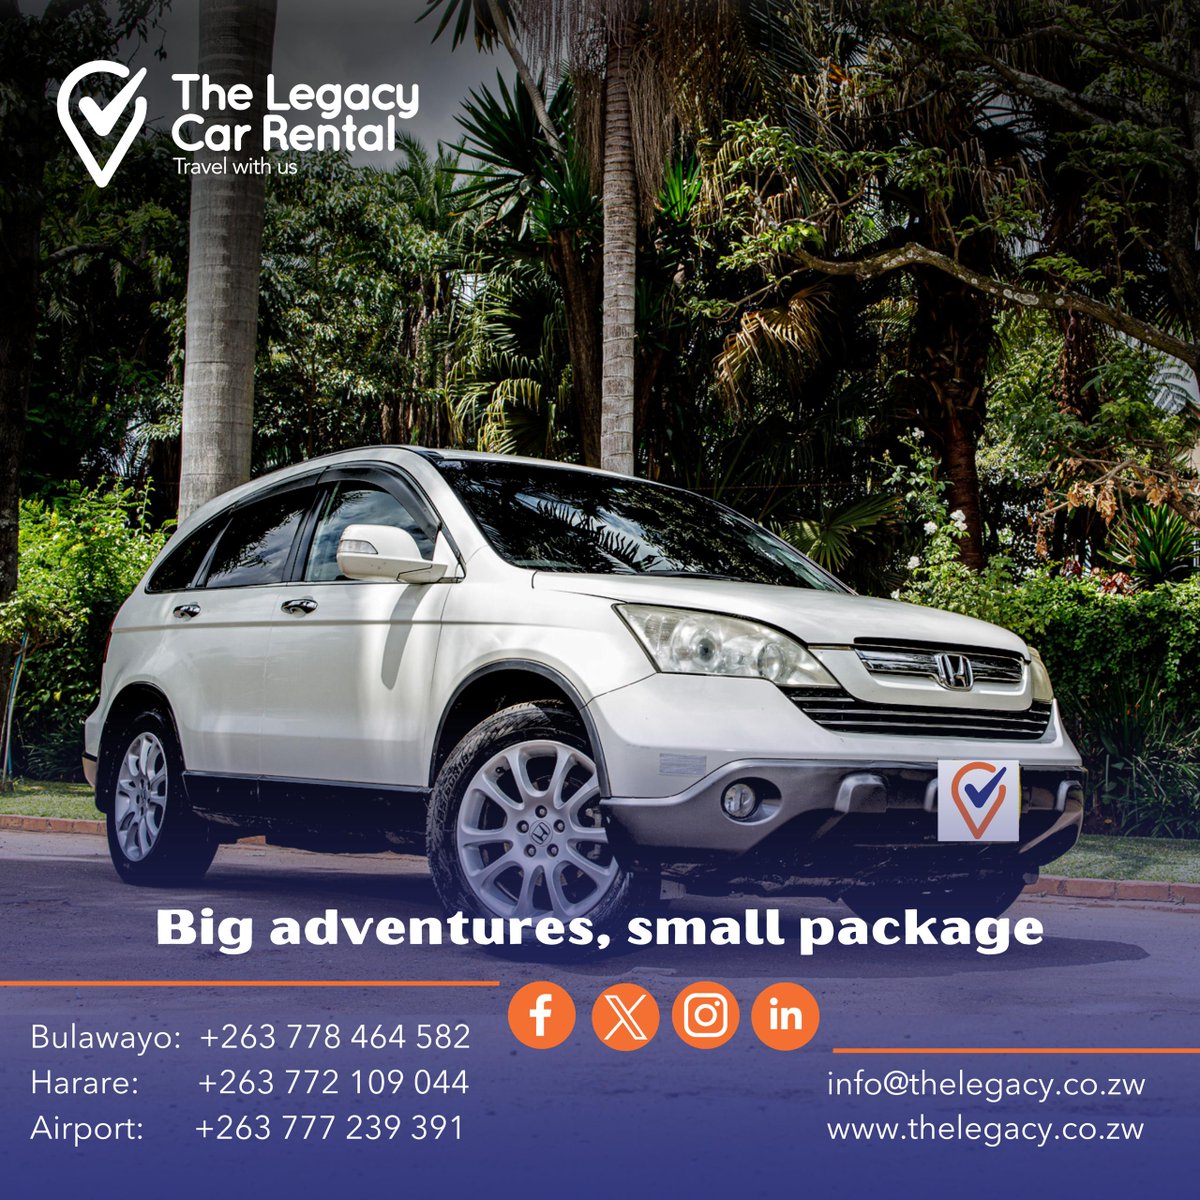 Adventure awaits. Loading up the weekend warrior wagon!
#weekendfun #weekendmood #adventure #weekendwarrior #Travelwithus #carrental